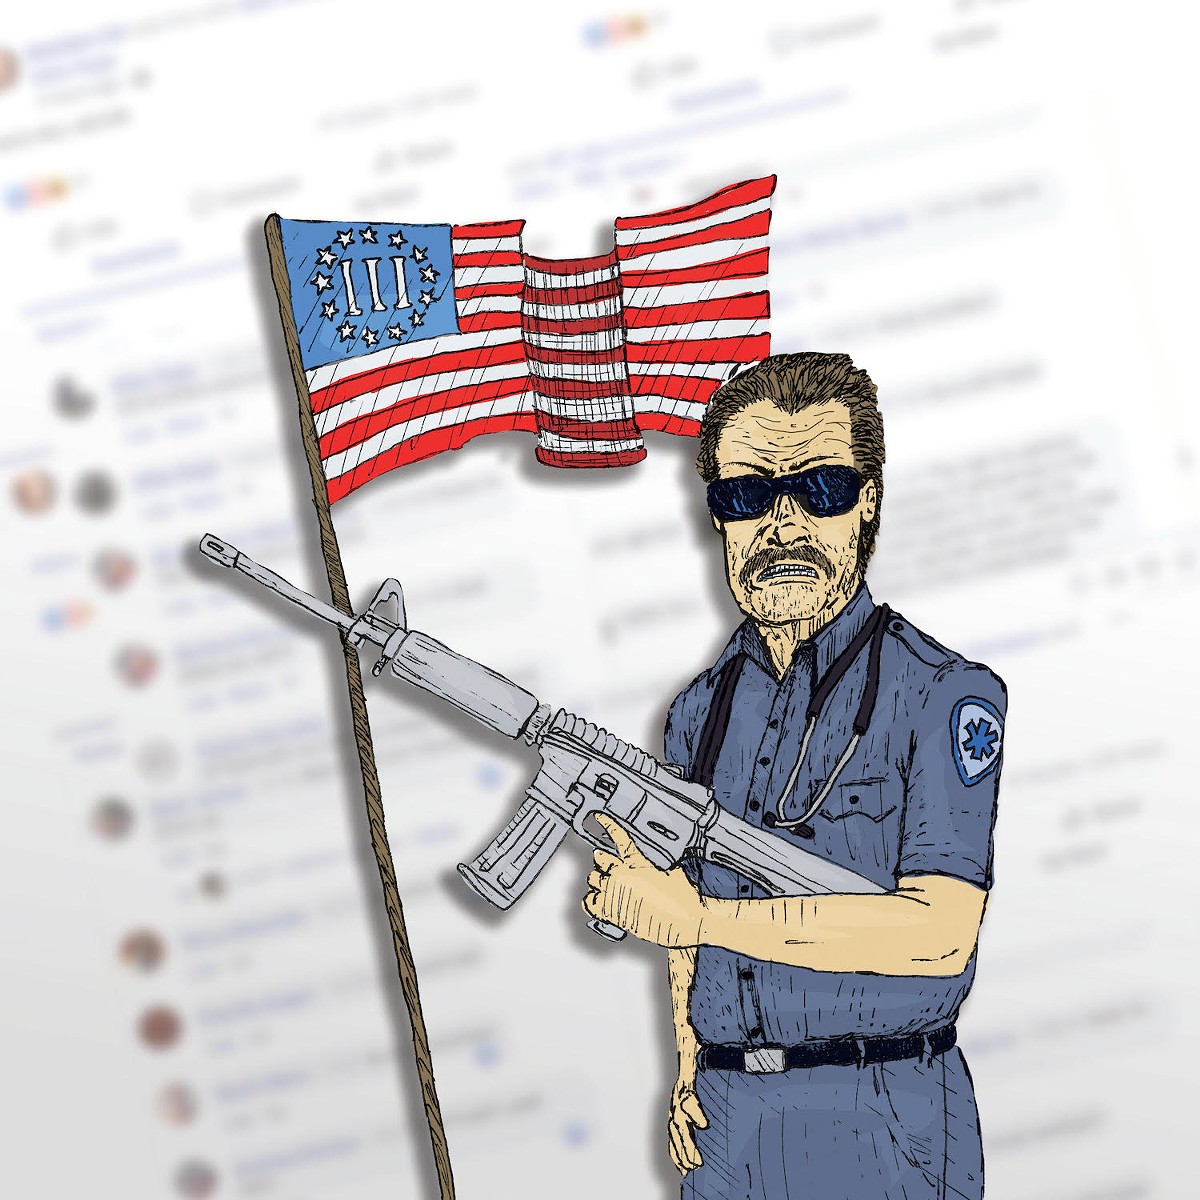 Welcome to Roll Call, a Facebook group set up by a violent militia leader full of EMTs, cops and corrections officers